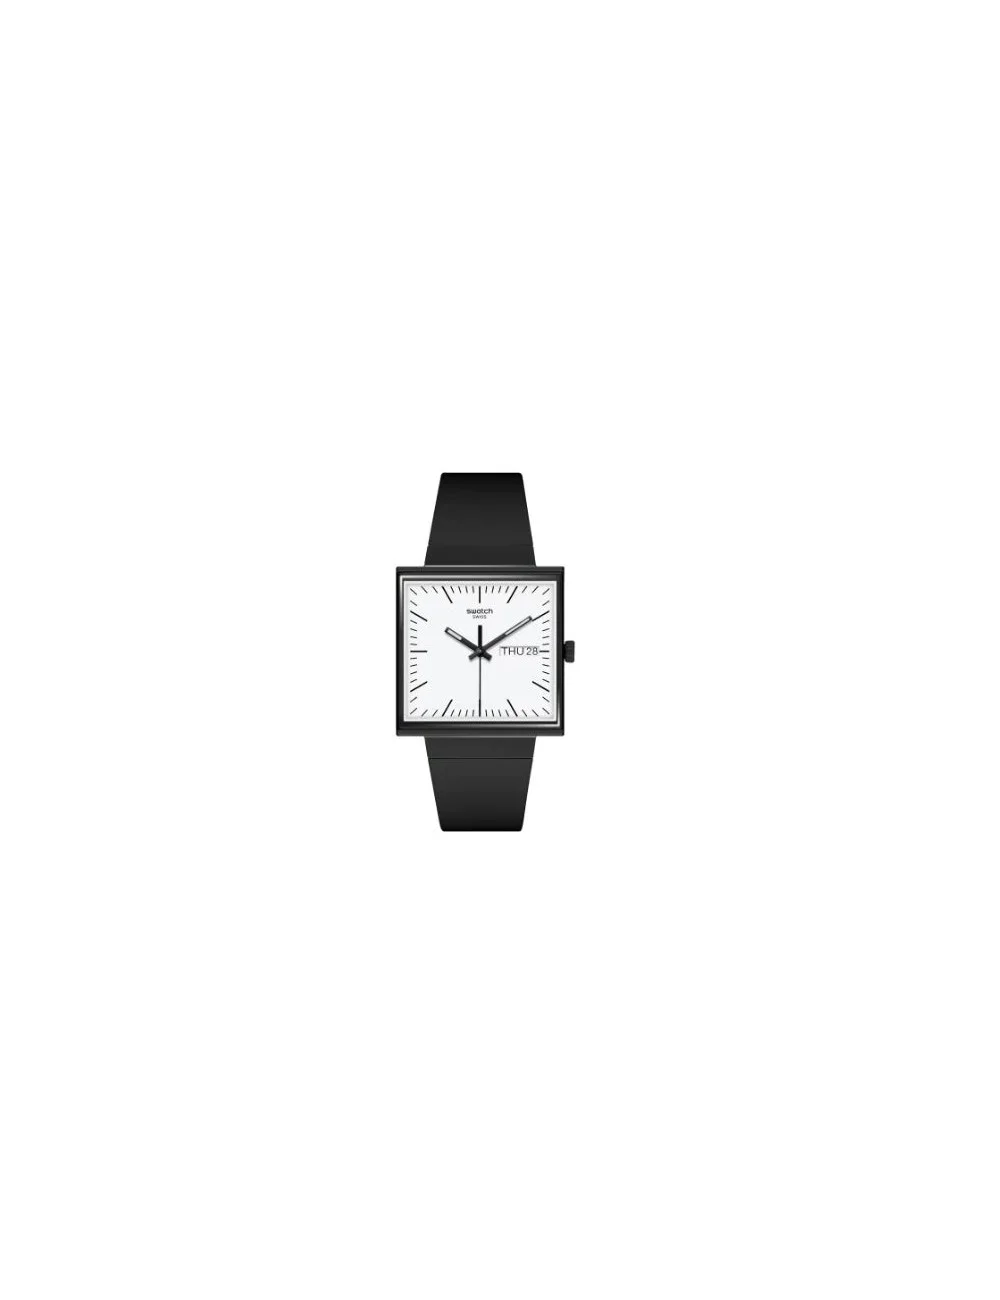 Orologio Swatch What if...Black?